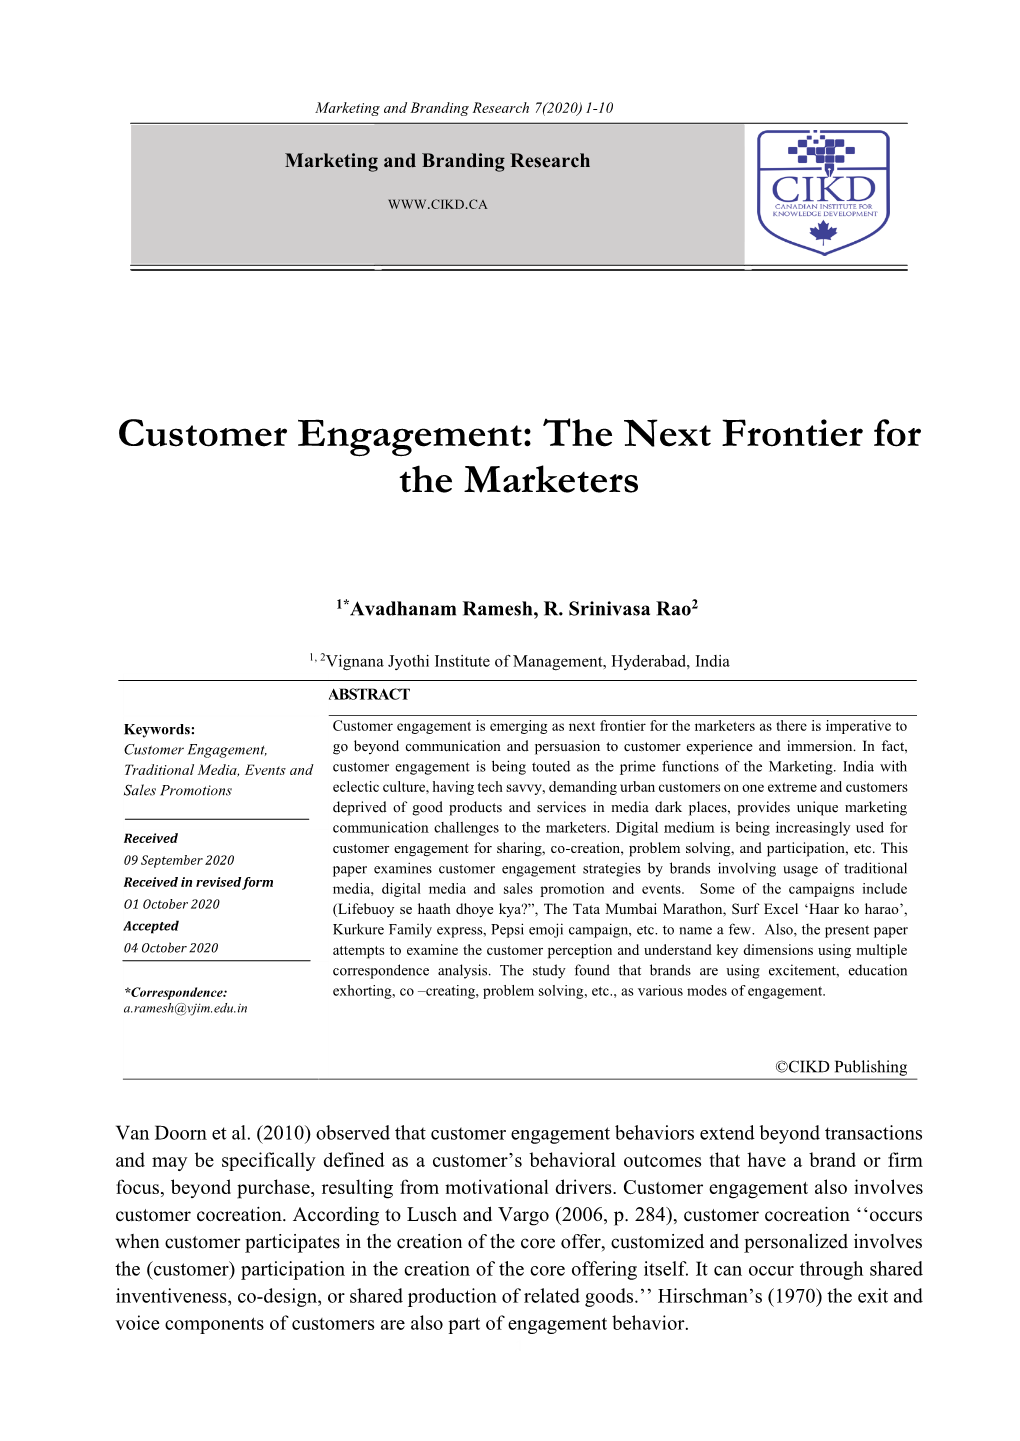 Customer Engagement: the Next Frontier for the Marketers